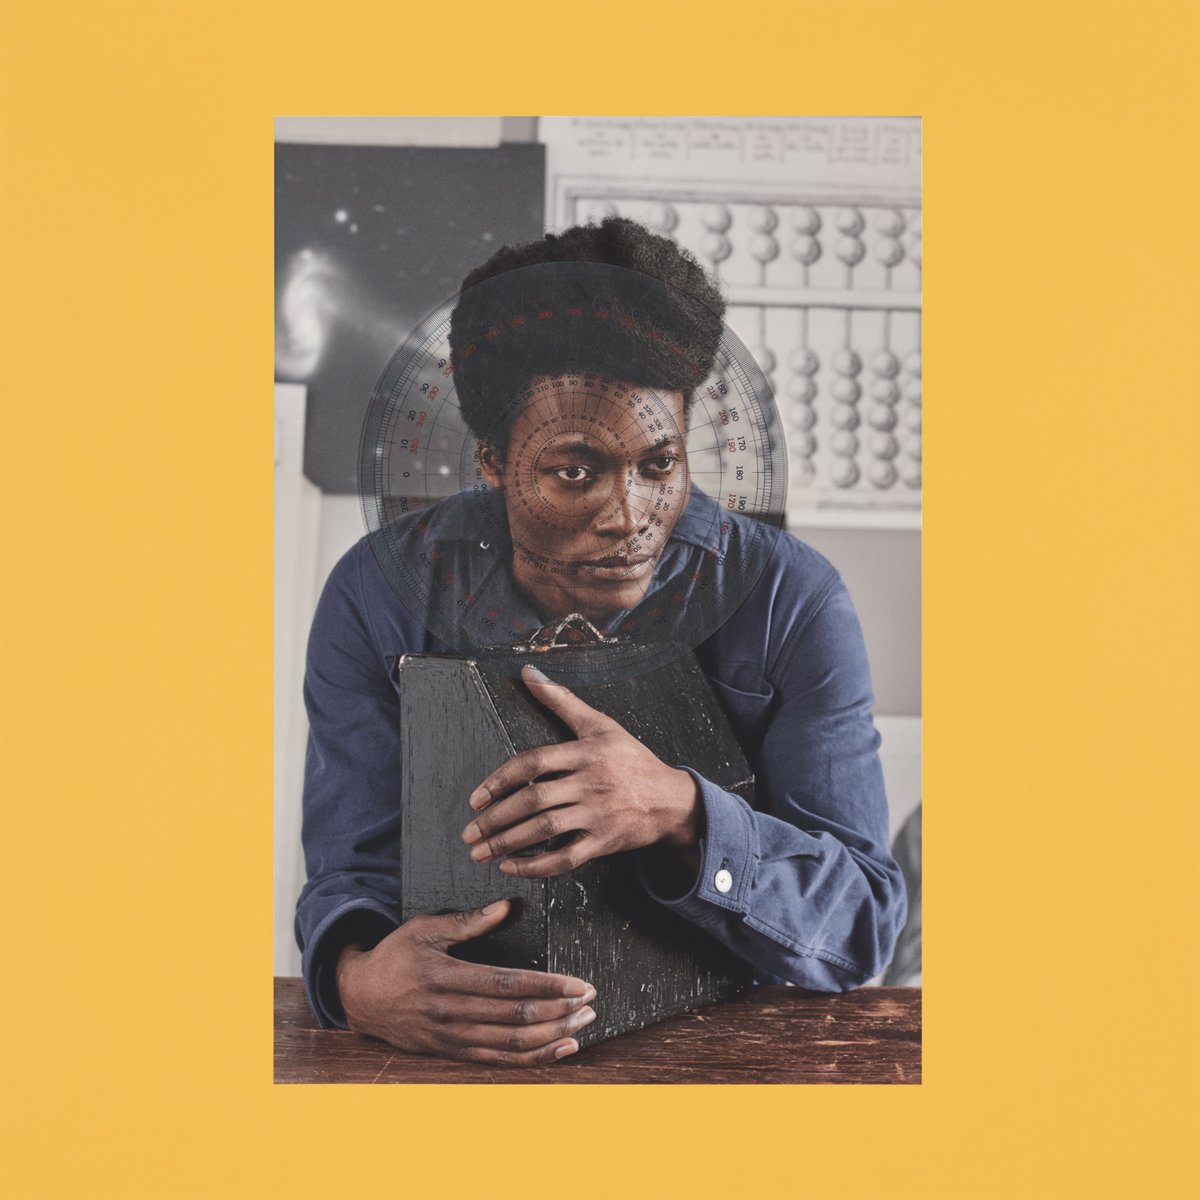 benjamin clementine Album I tell a fly 2017